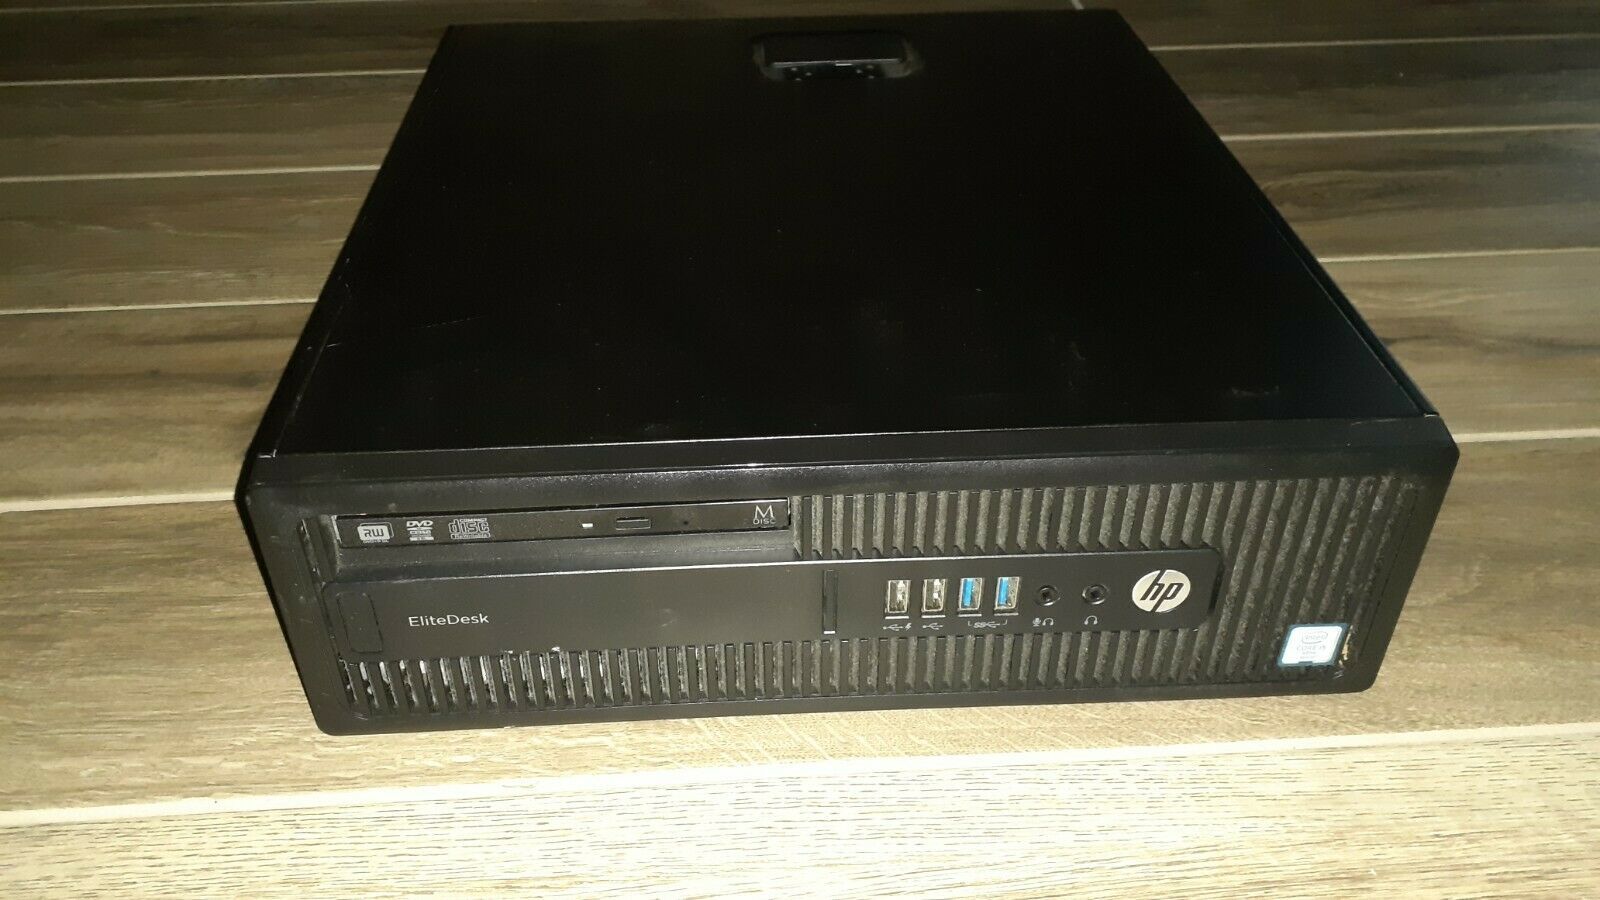 Hp Elitedesk 800 G2 Sff Intel i5 6500 3.2GHz and 50 similar items